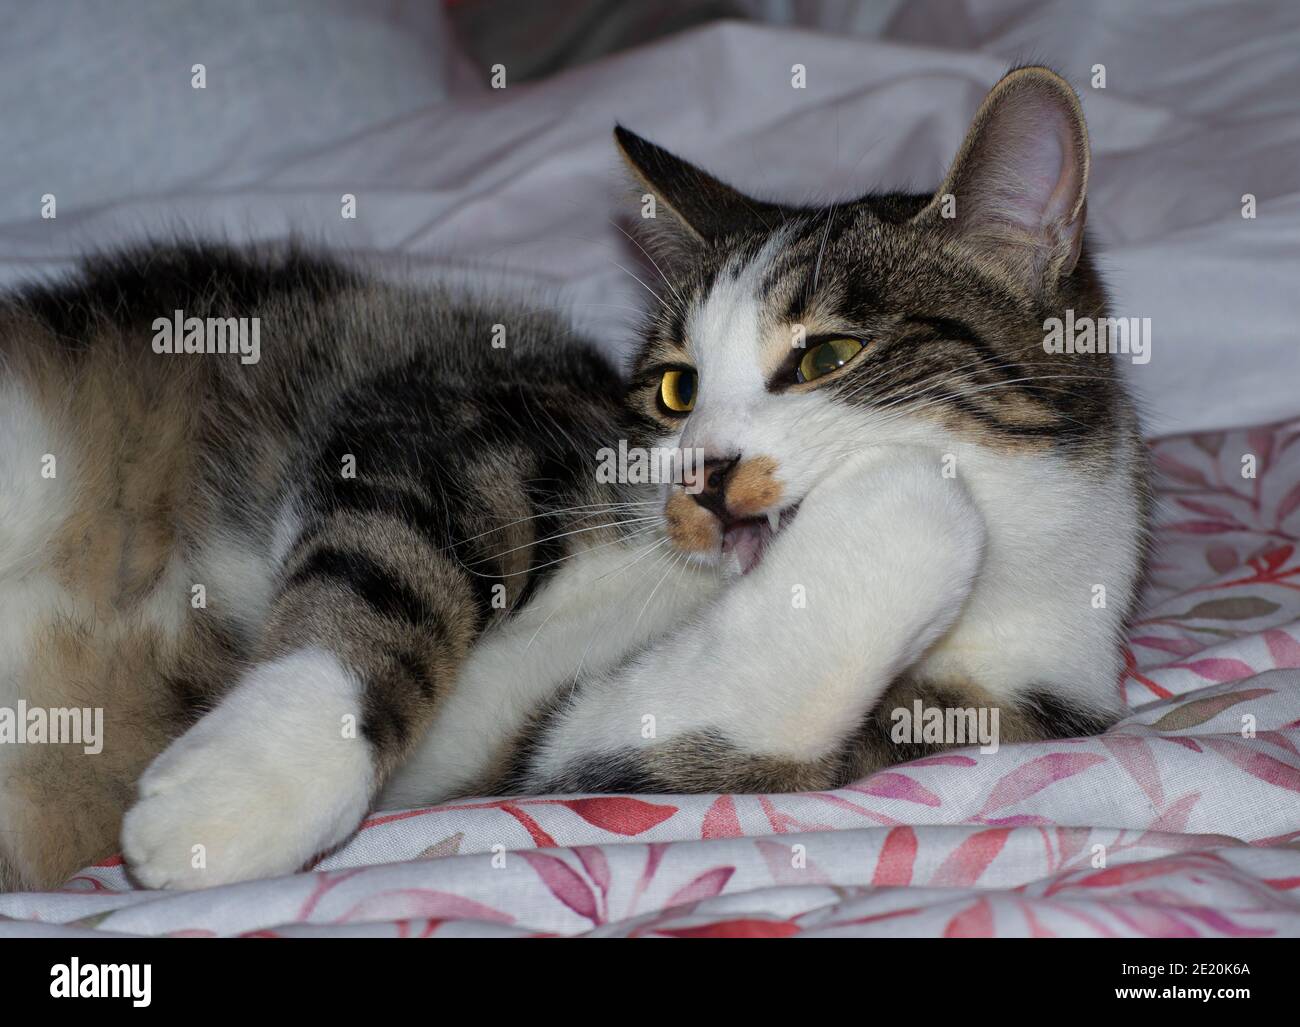 portrait of a cat lying on the bed wiping a paw Stock Photo